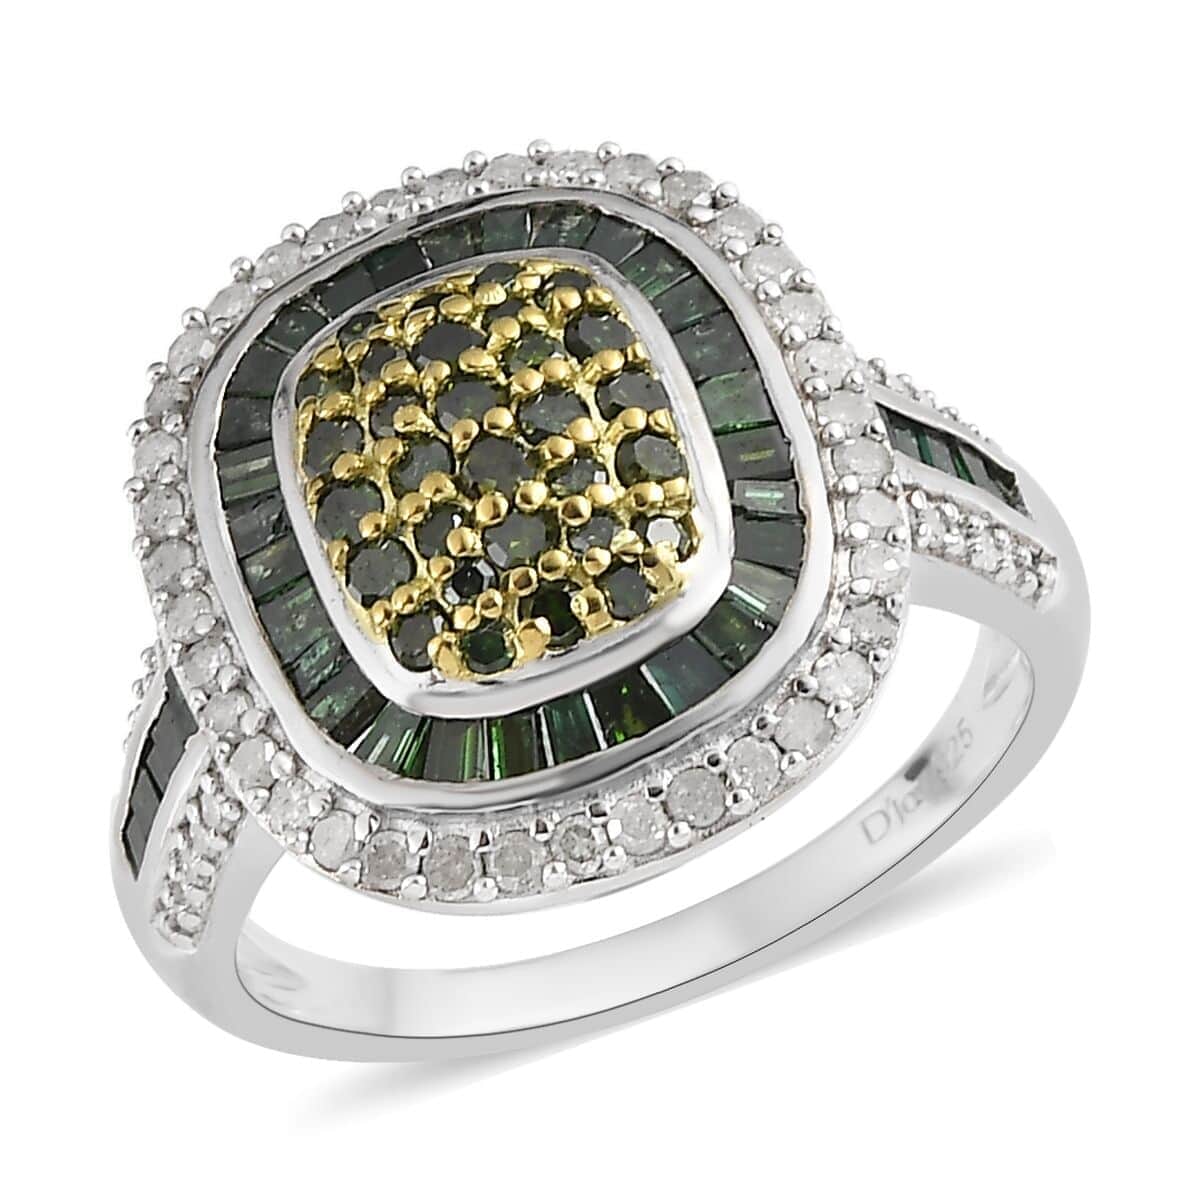 Buy Green and White Diamond Cocktail Ring in Platinum Over